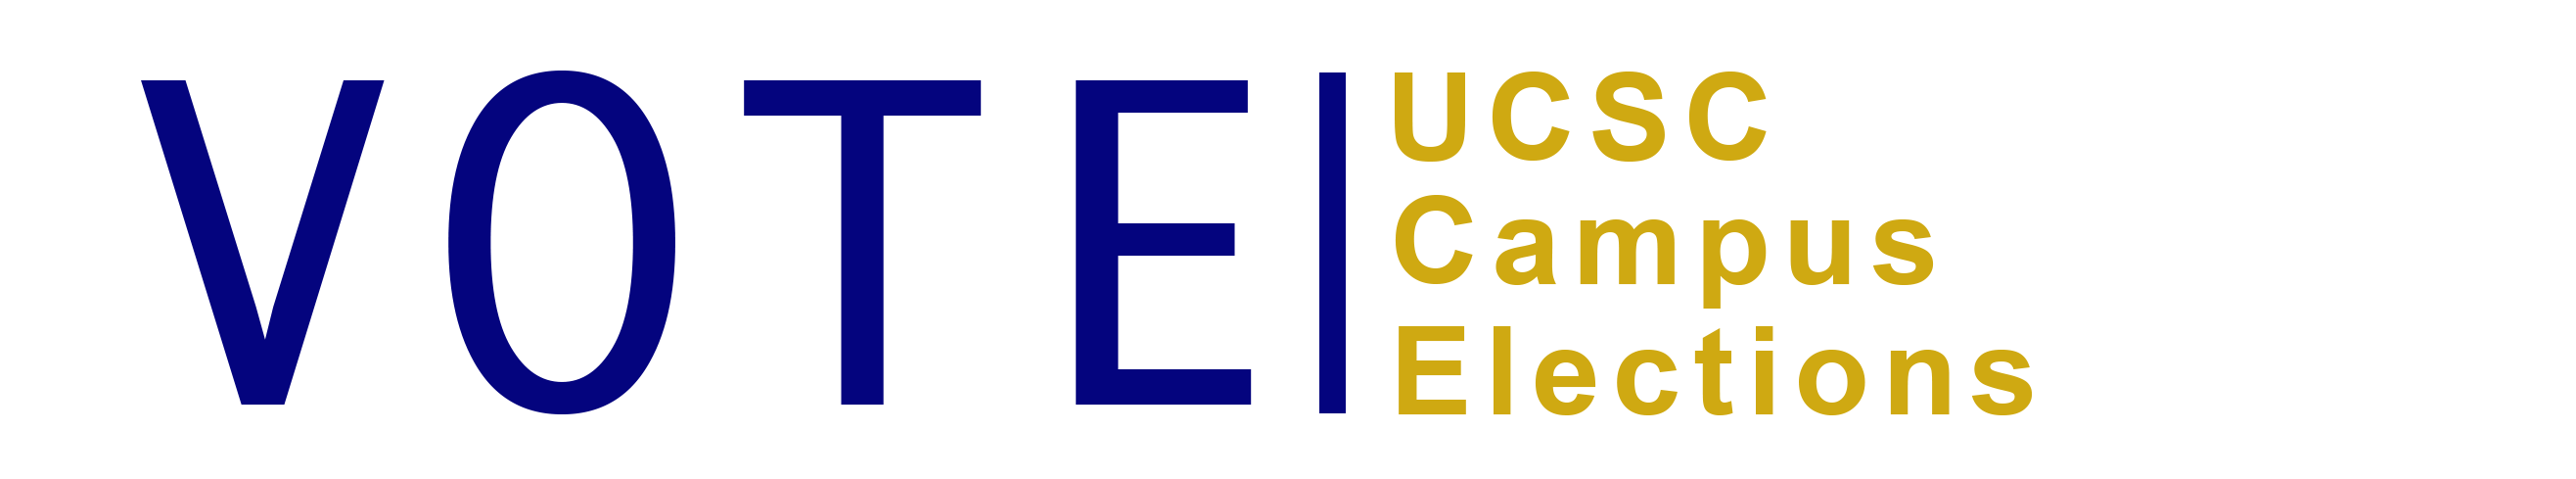 campus-elections-vote-logo-1.png